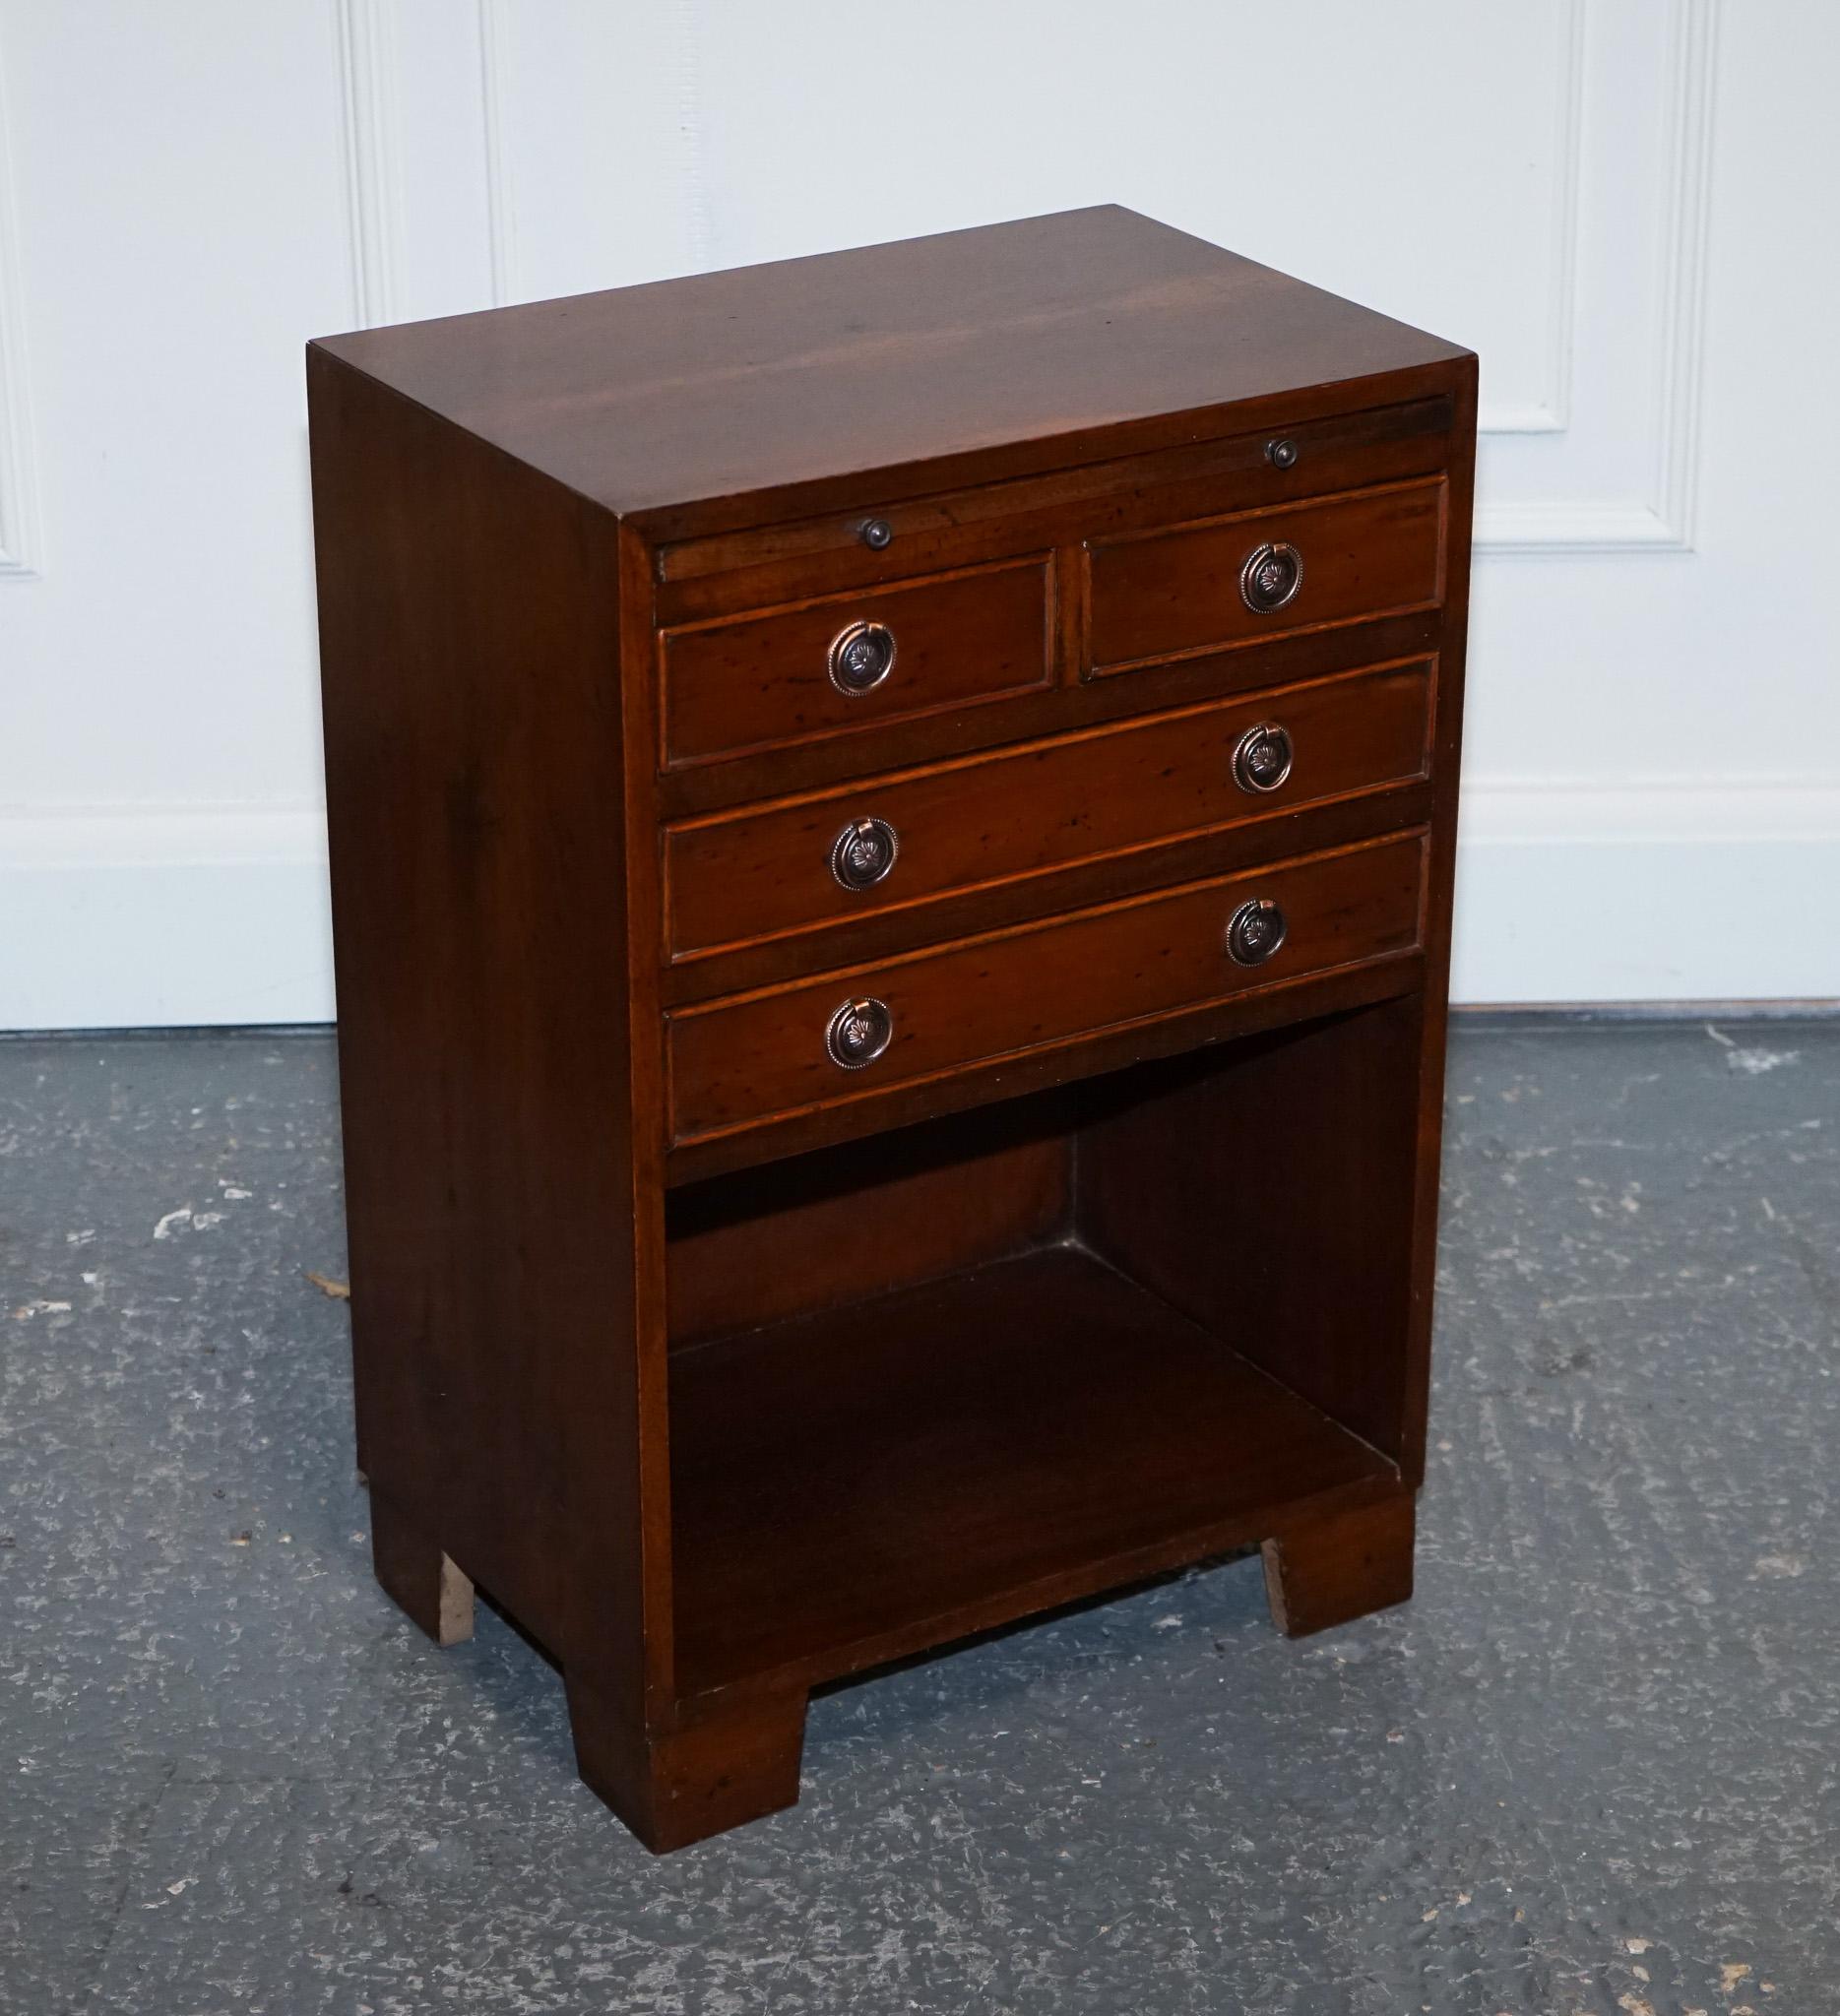 GORGEOUS PAIR OF HARDWOOD GEORGIAN STYLE NIGHTSTANDS WiTH DRAWERS 1